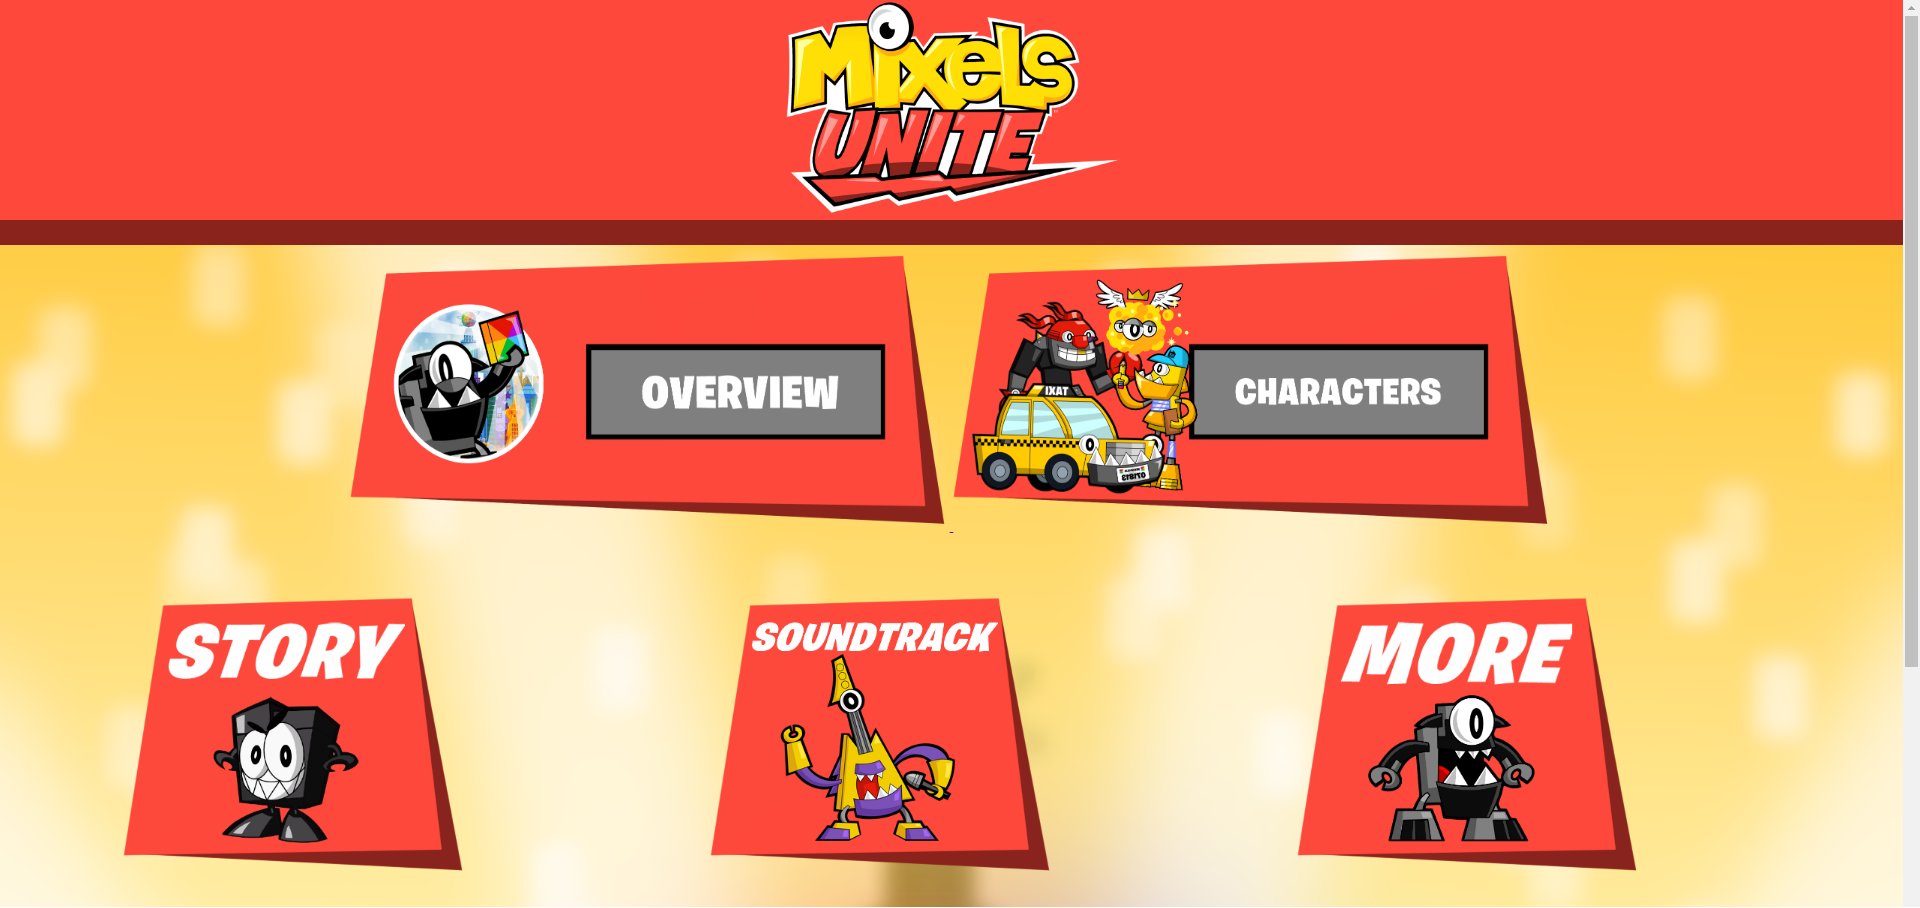 hane Leonardoda indeks Mixels Unite (FANGAME) on Twitter: "Mixels Unite has an official website  now! https://t.co/Rsy1hw5JXK will be a primary source for updates and  information on the game over the coming months, in addition to